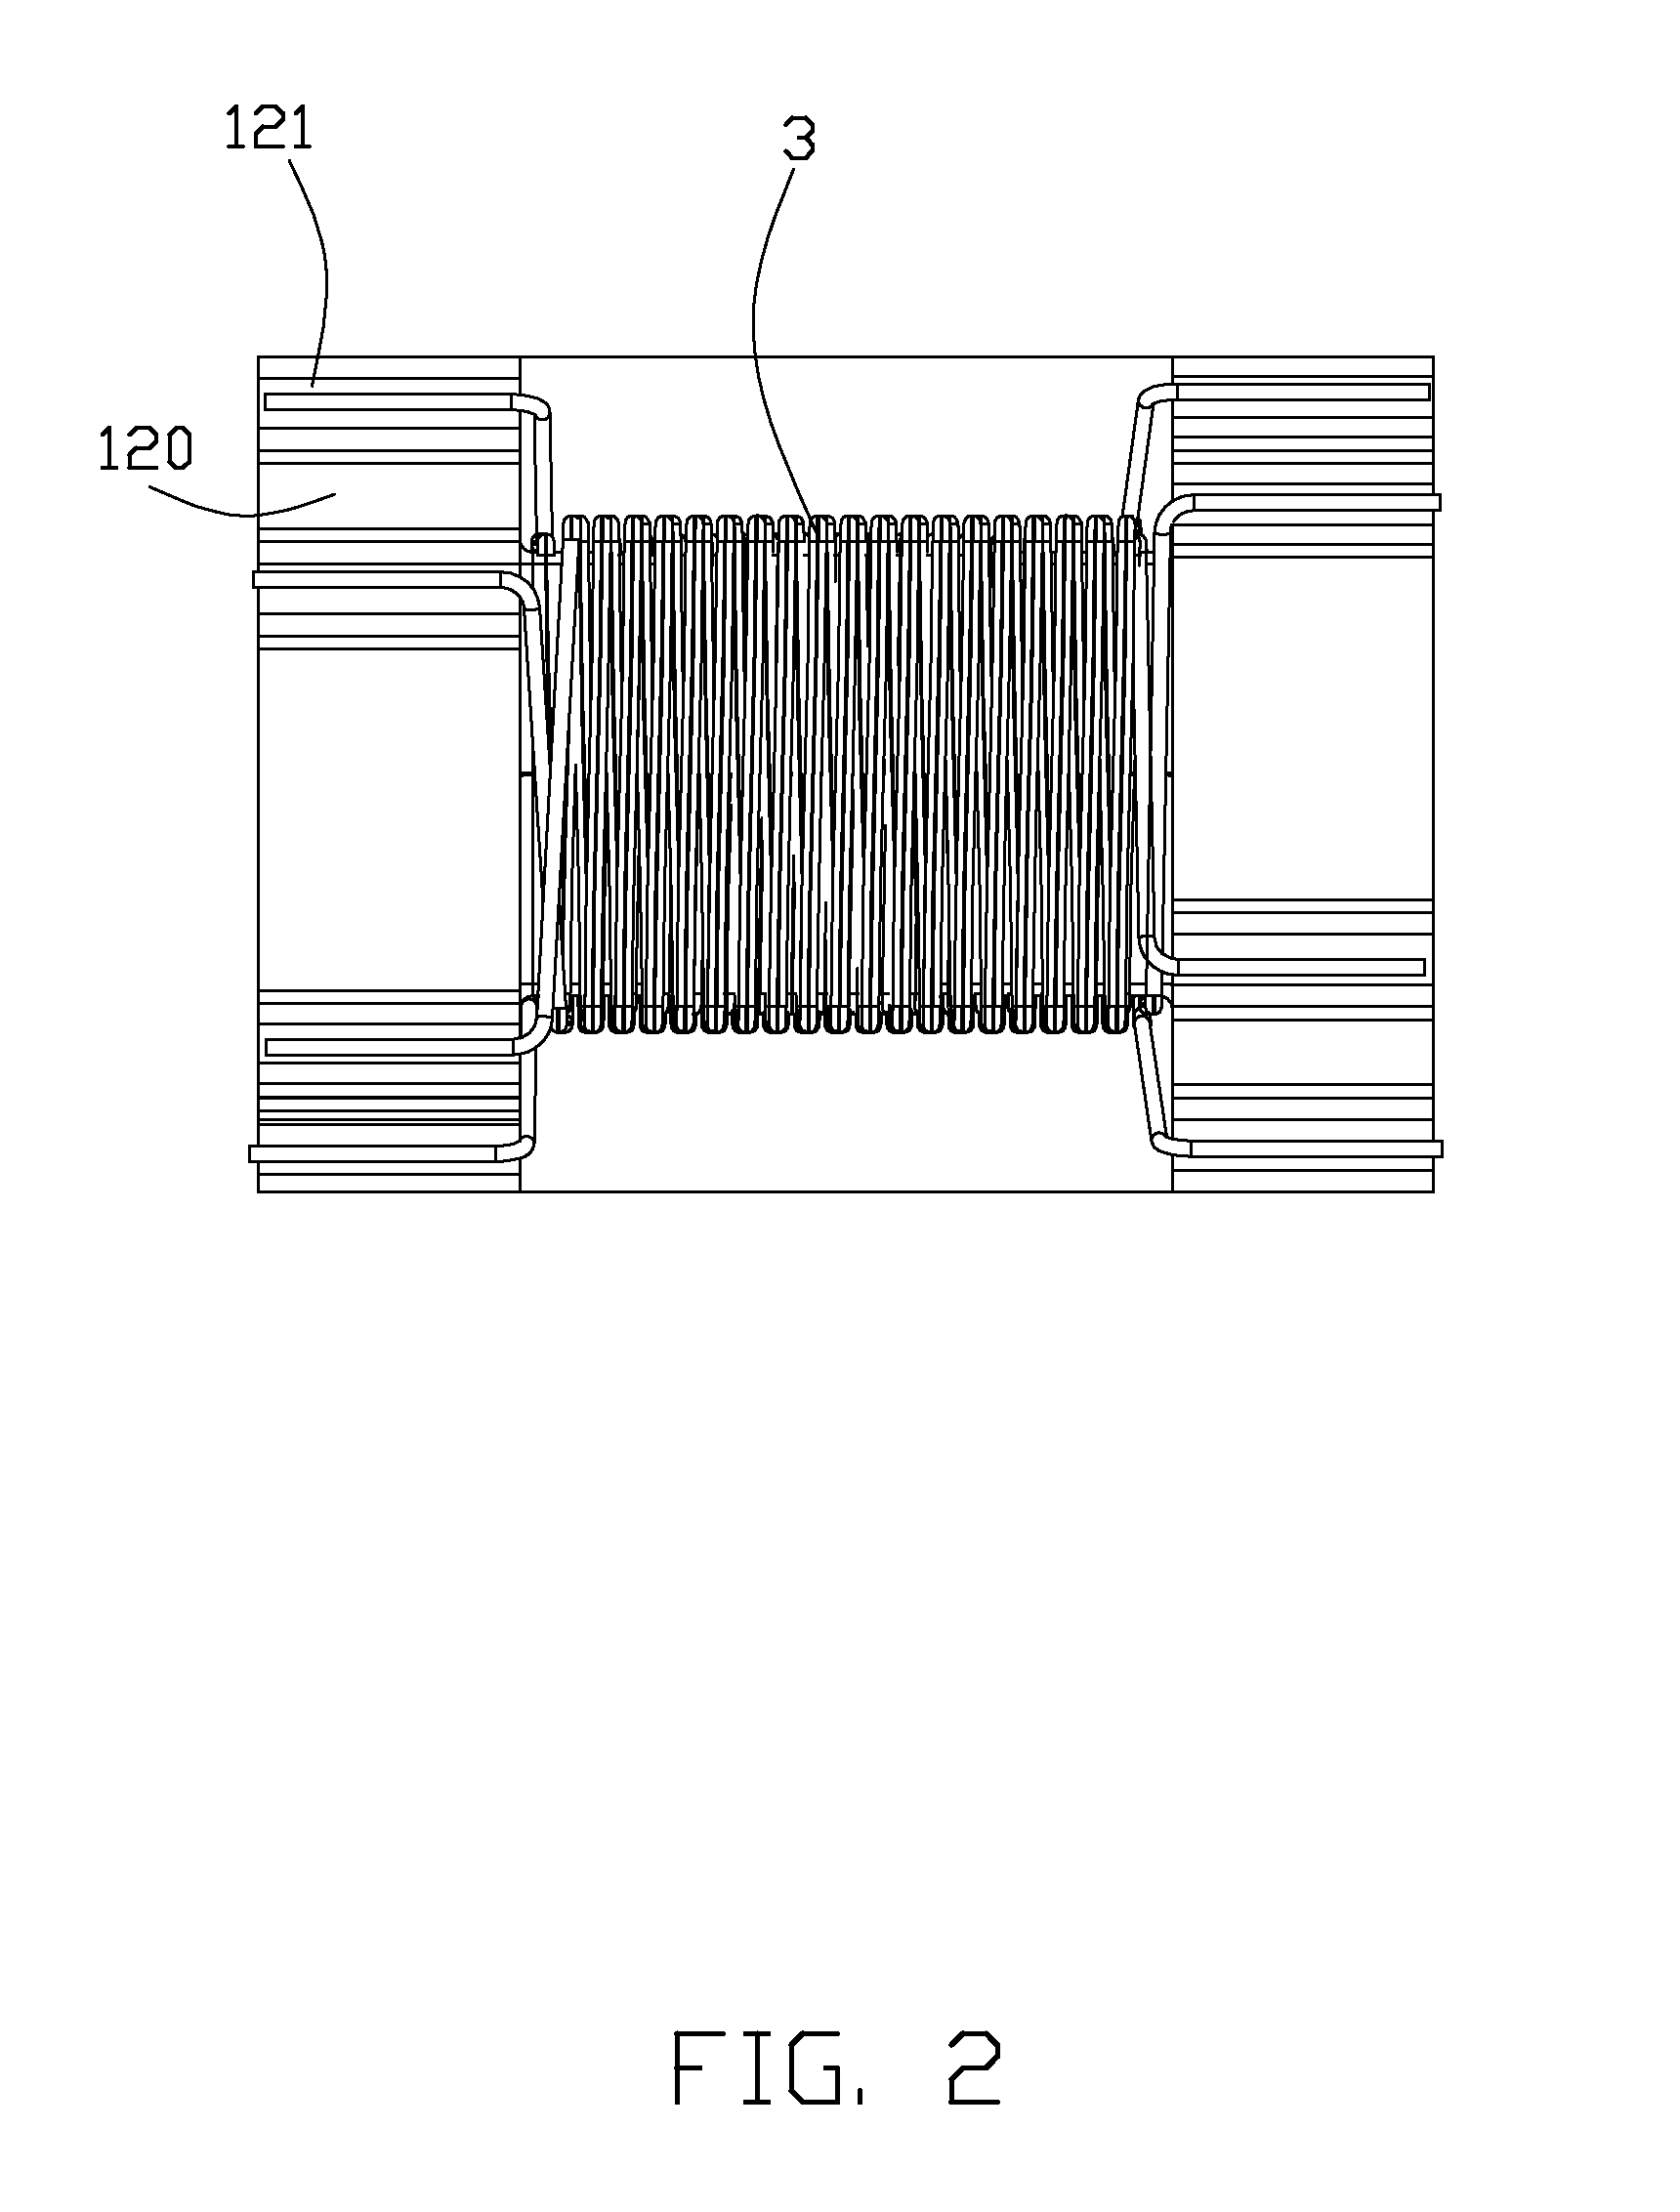 Surface mounted pulse transformer